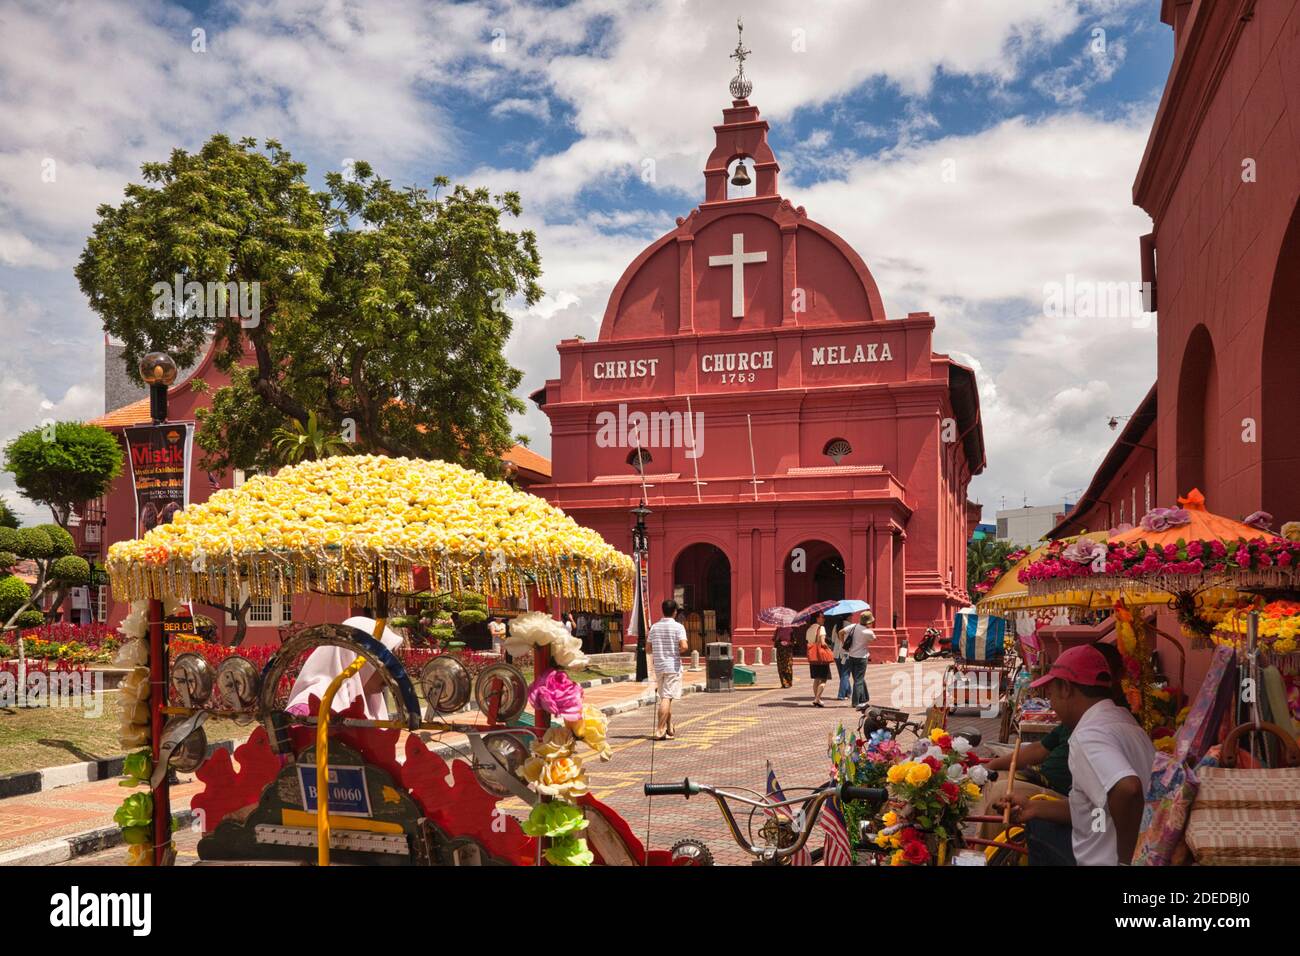 The main Church in Malacca with colourful decorative pedal trishaws on the road in front. Malacca, Malaysia Stock Photo